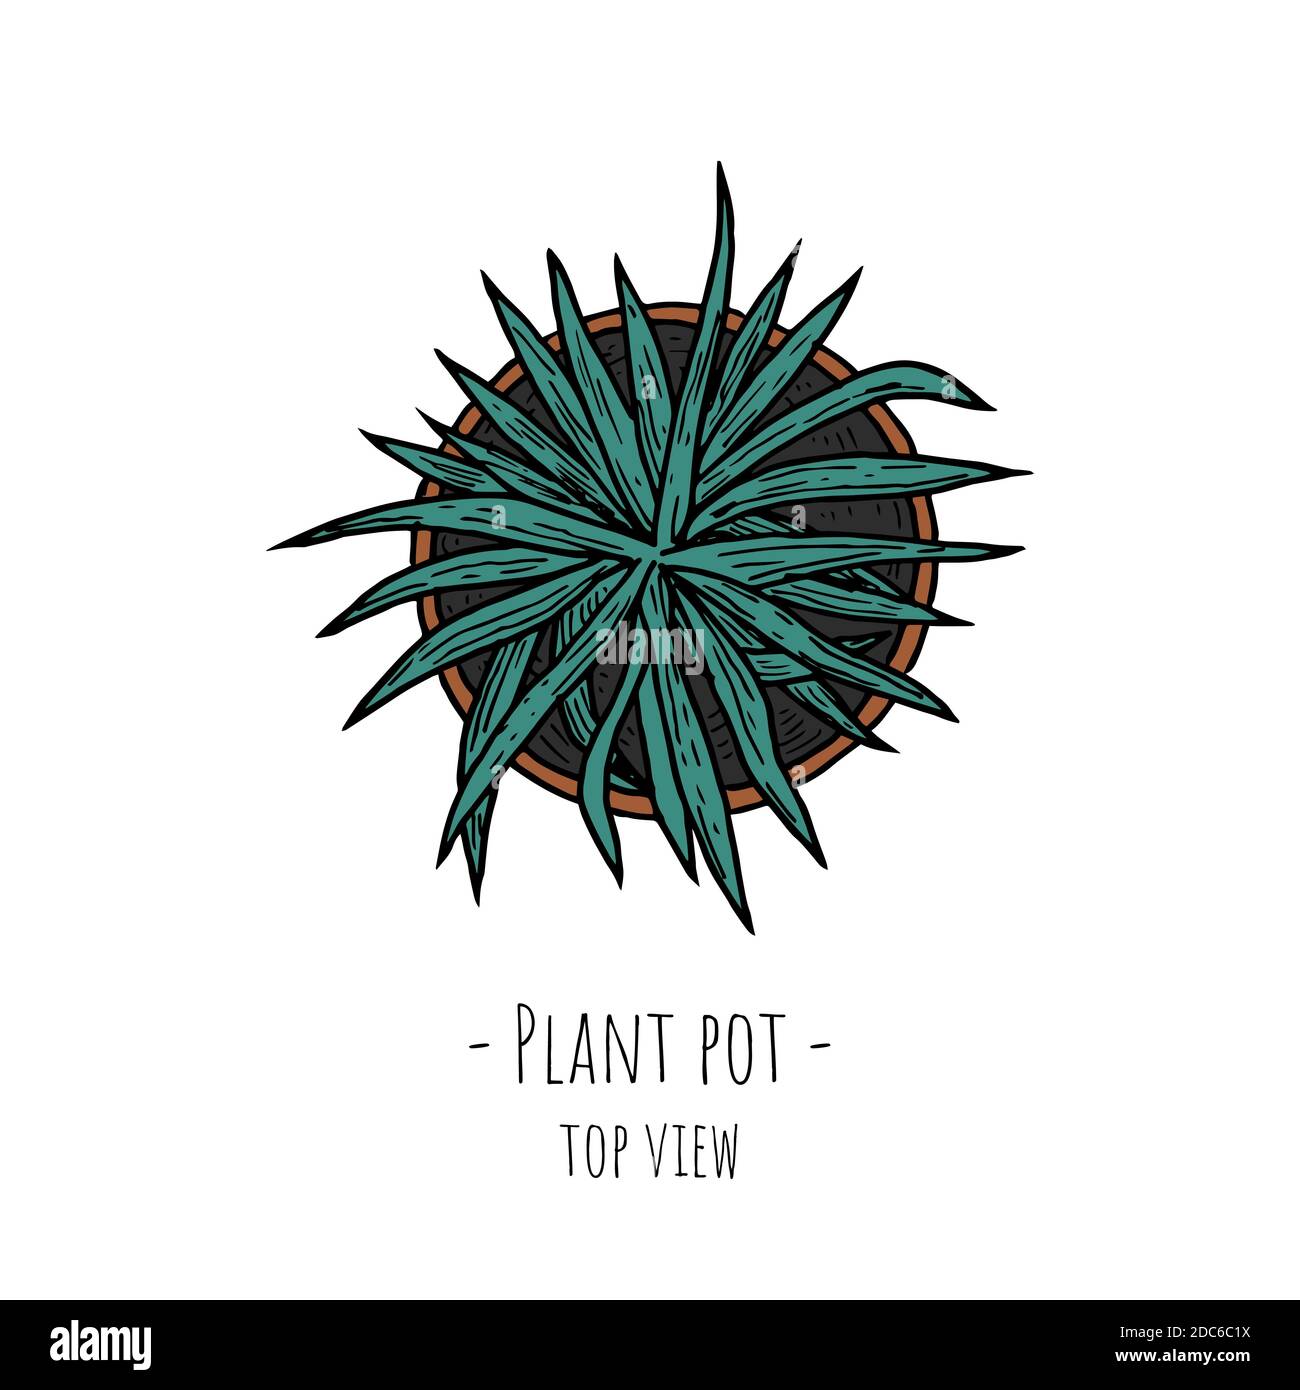 Plant pot. Top view. Isolated object on a white background. Vector cartoon illustration. Hand-drawn style. Stock Vector